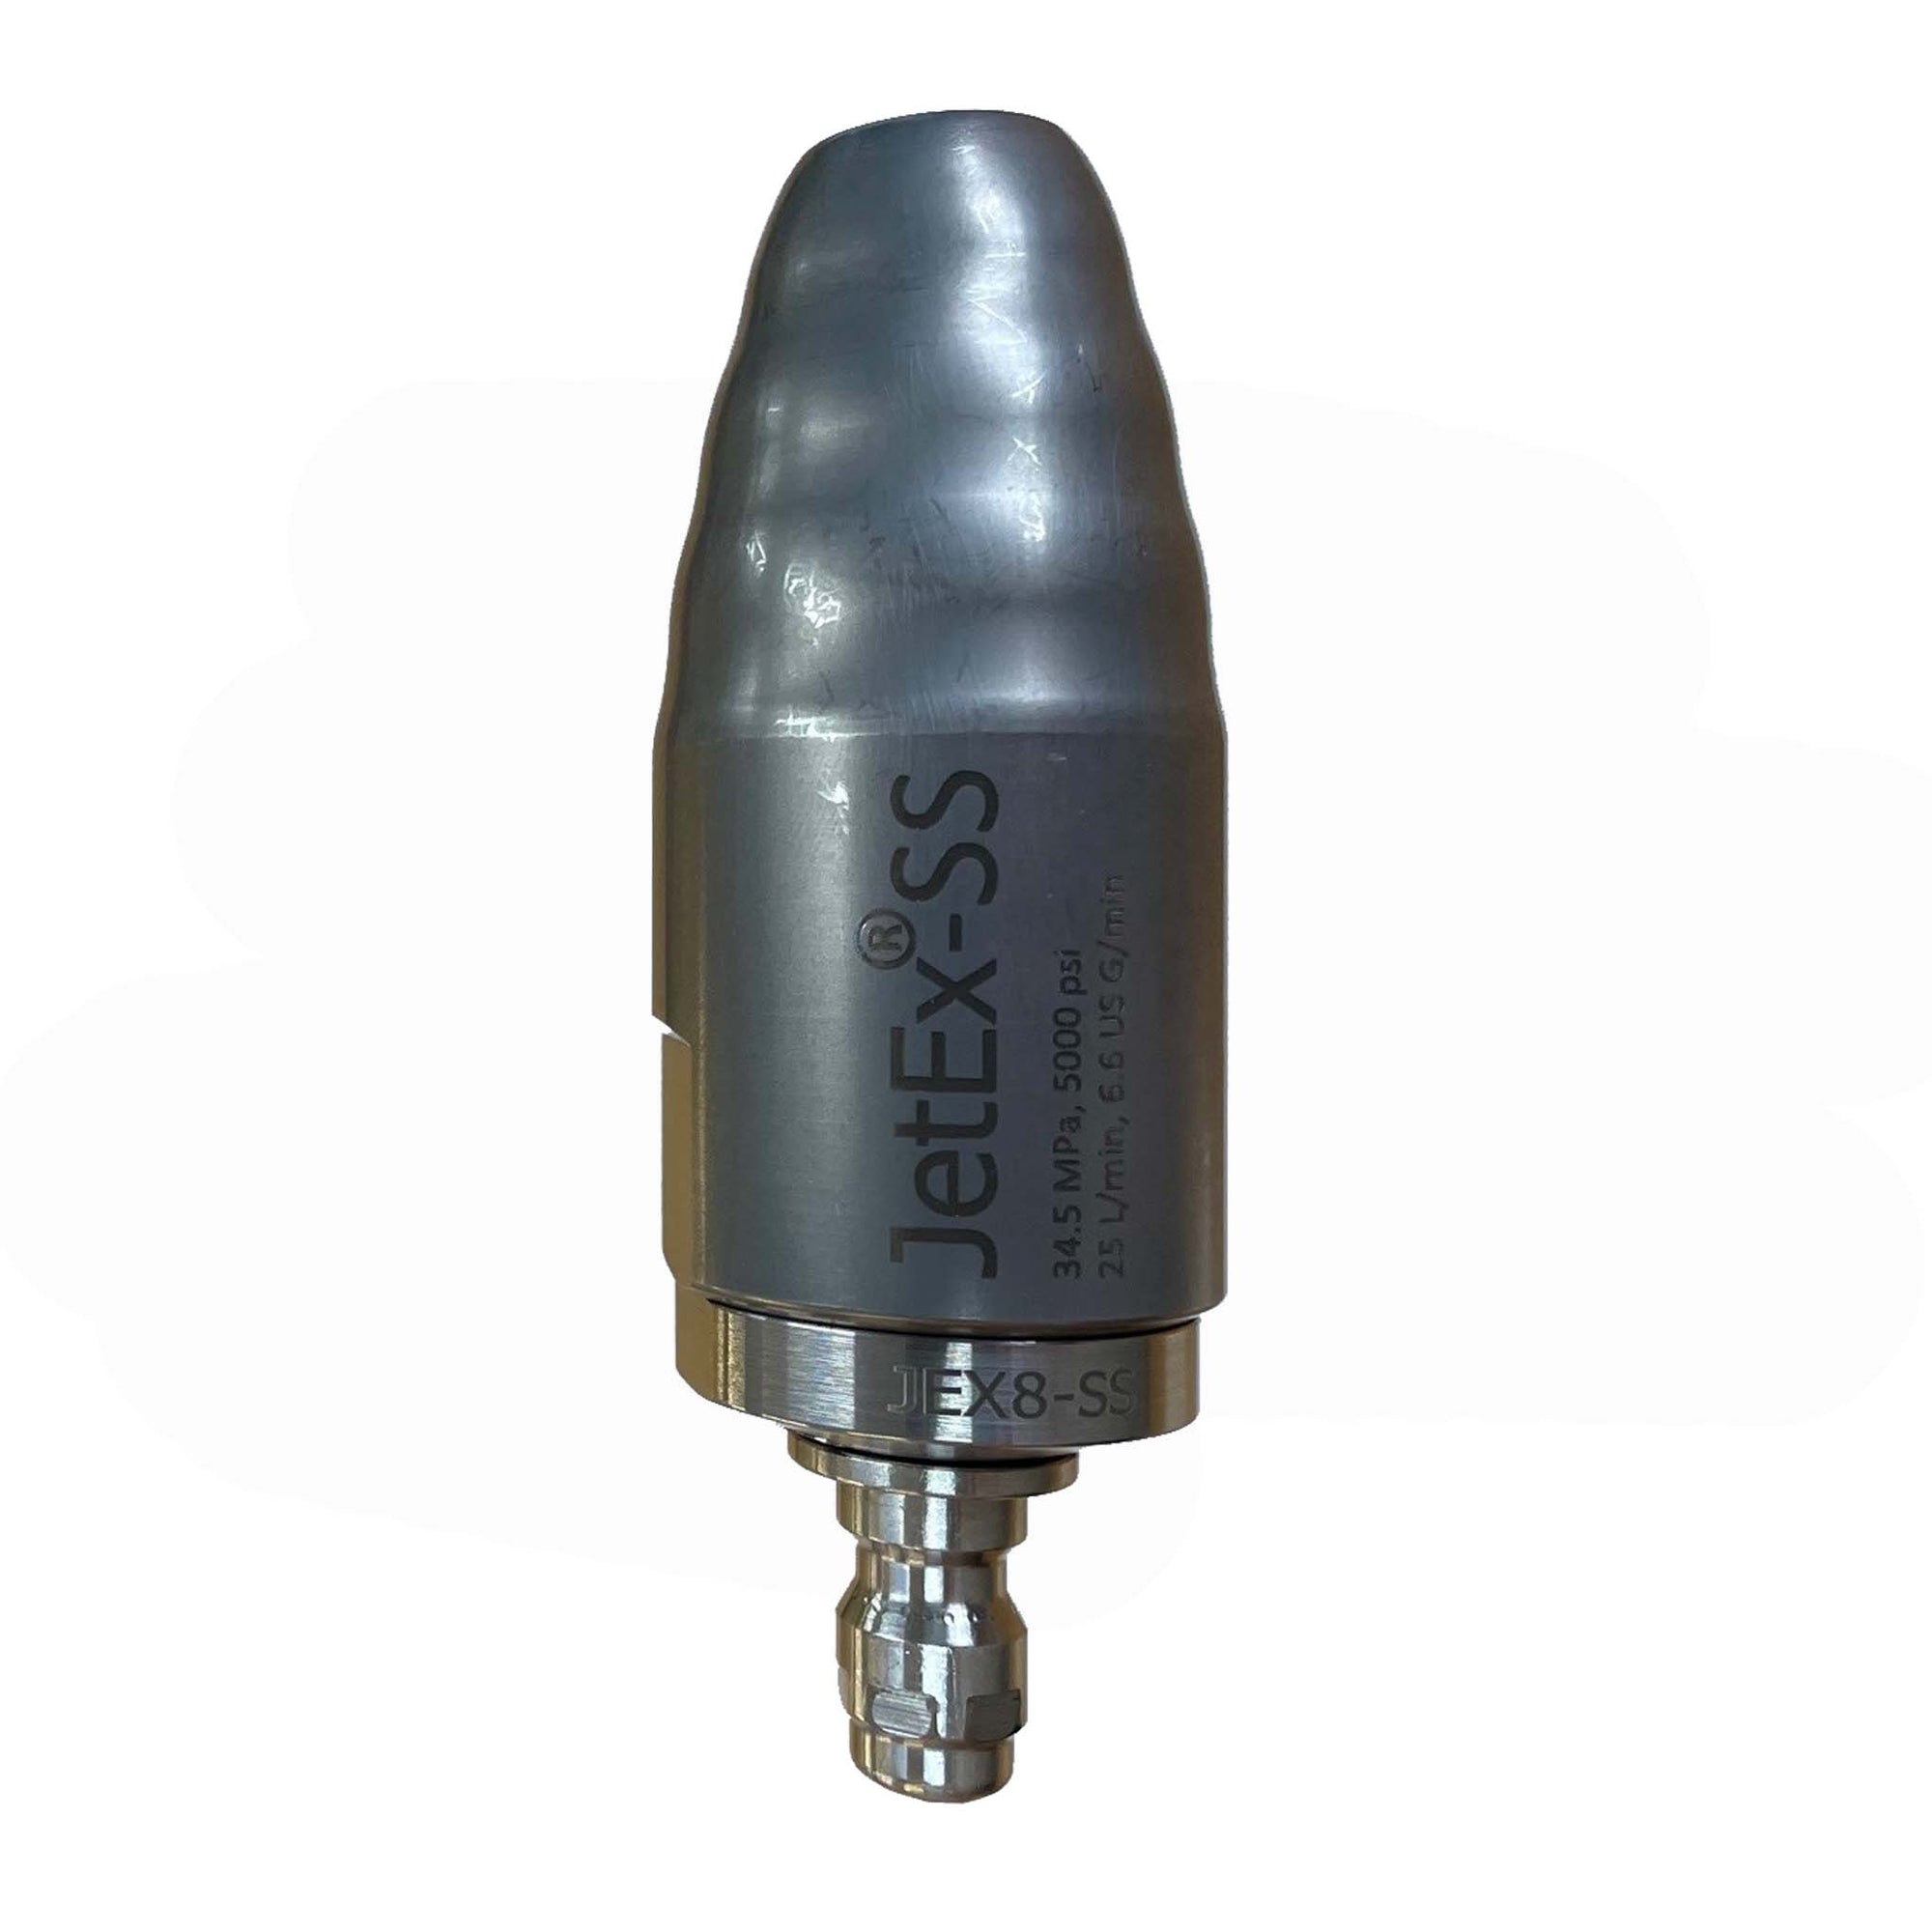 JetEx Stainless Steel Turbine Nozzle 1/4" with QR Adaptor